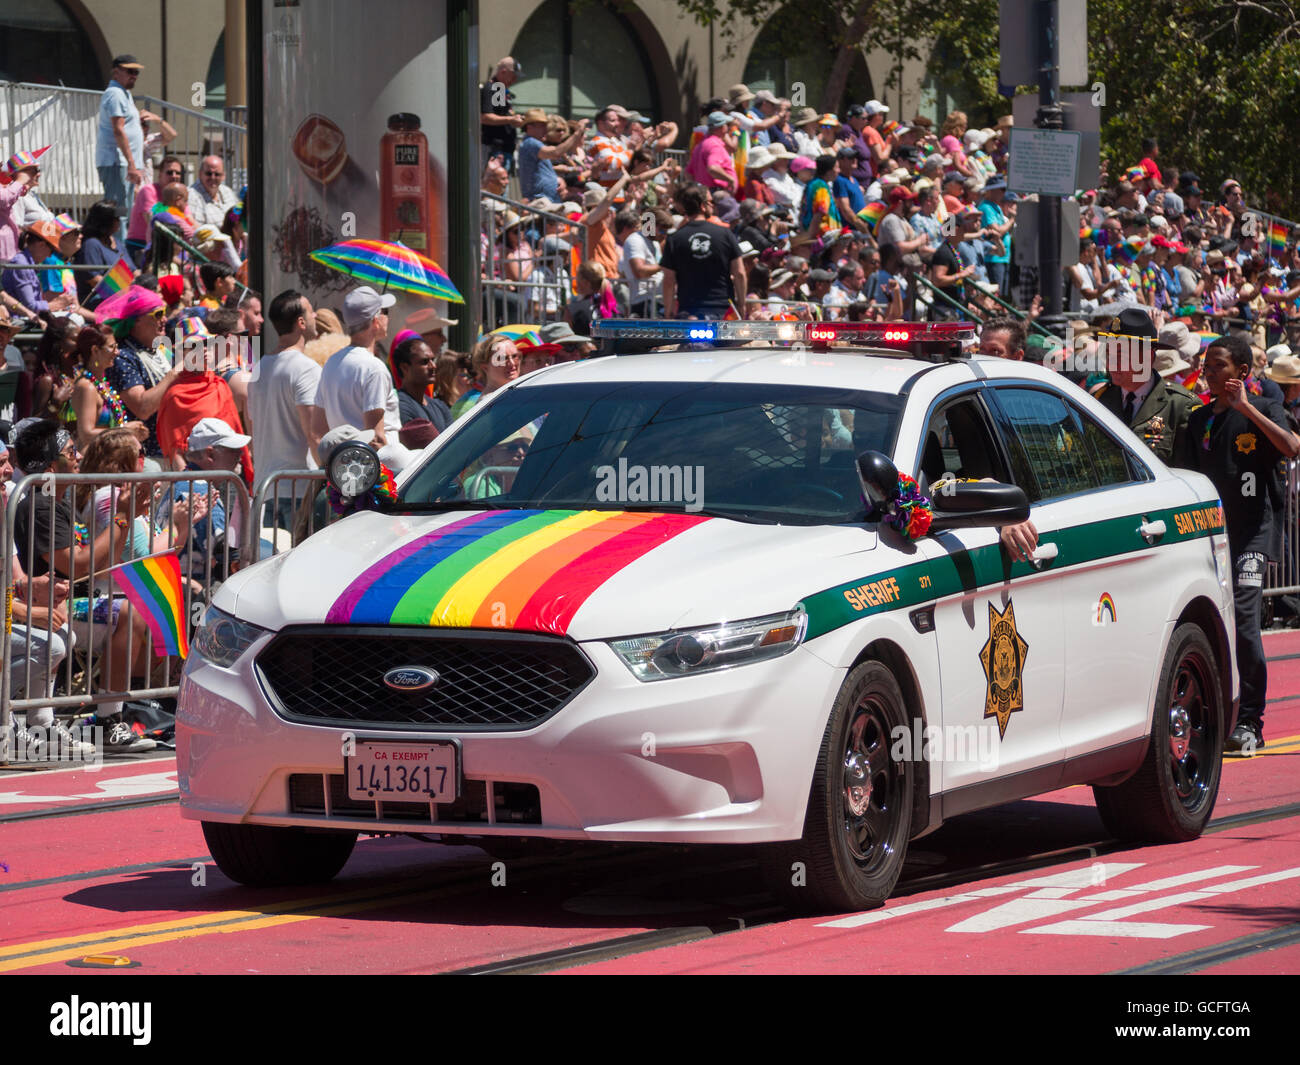 police-car-with-gay-flag-in-san-francisc